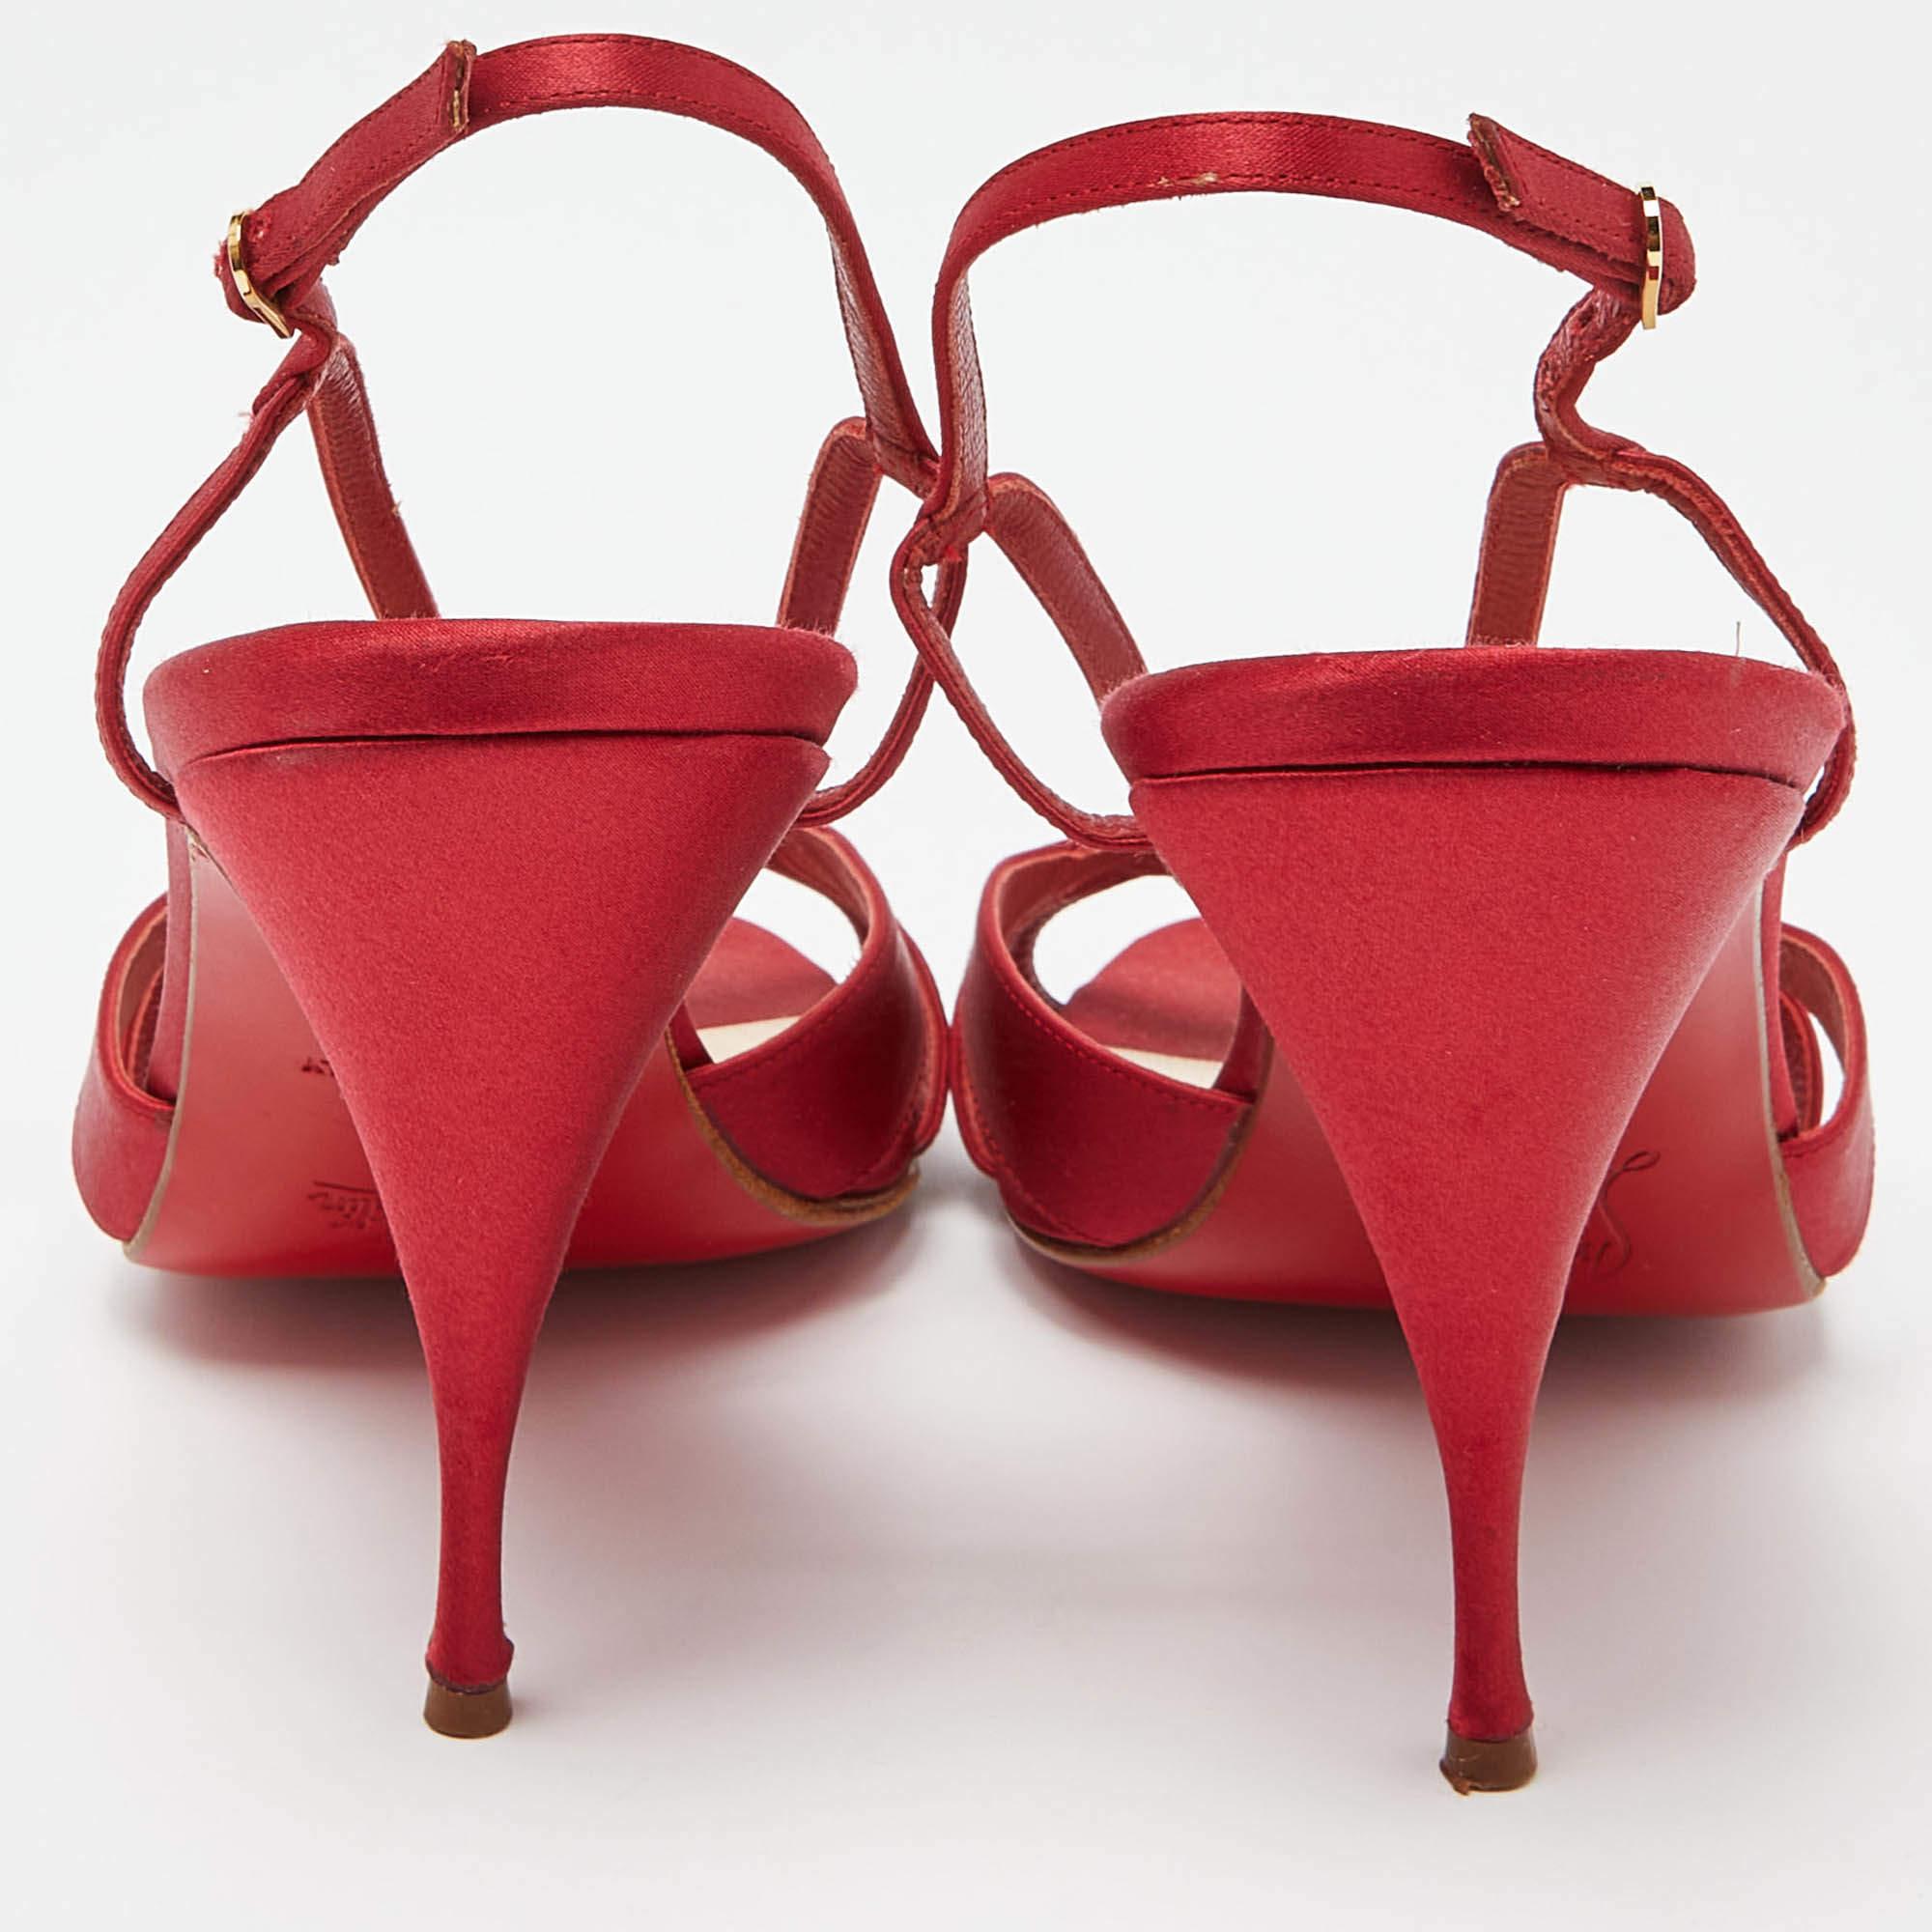 Christian Louboutin Red Satin Buckle Slingback Sandals Size 41 For Sale 2